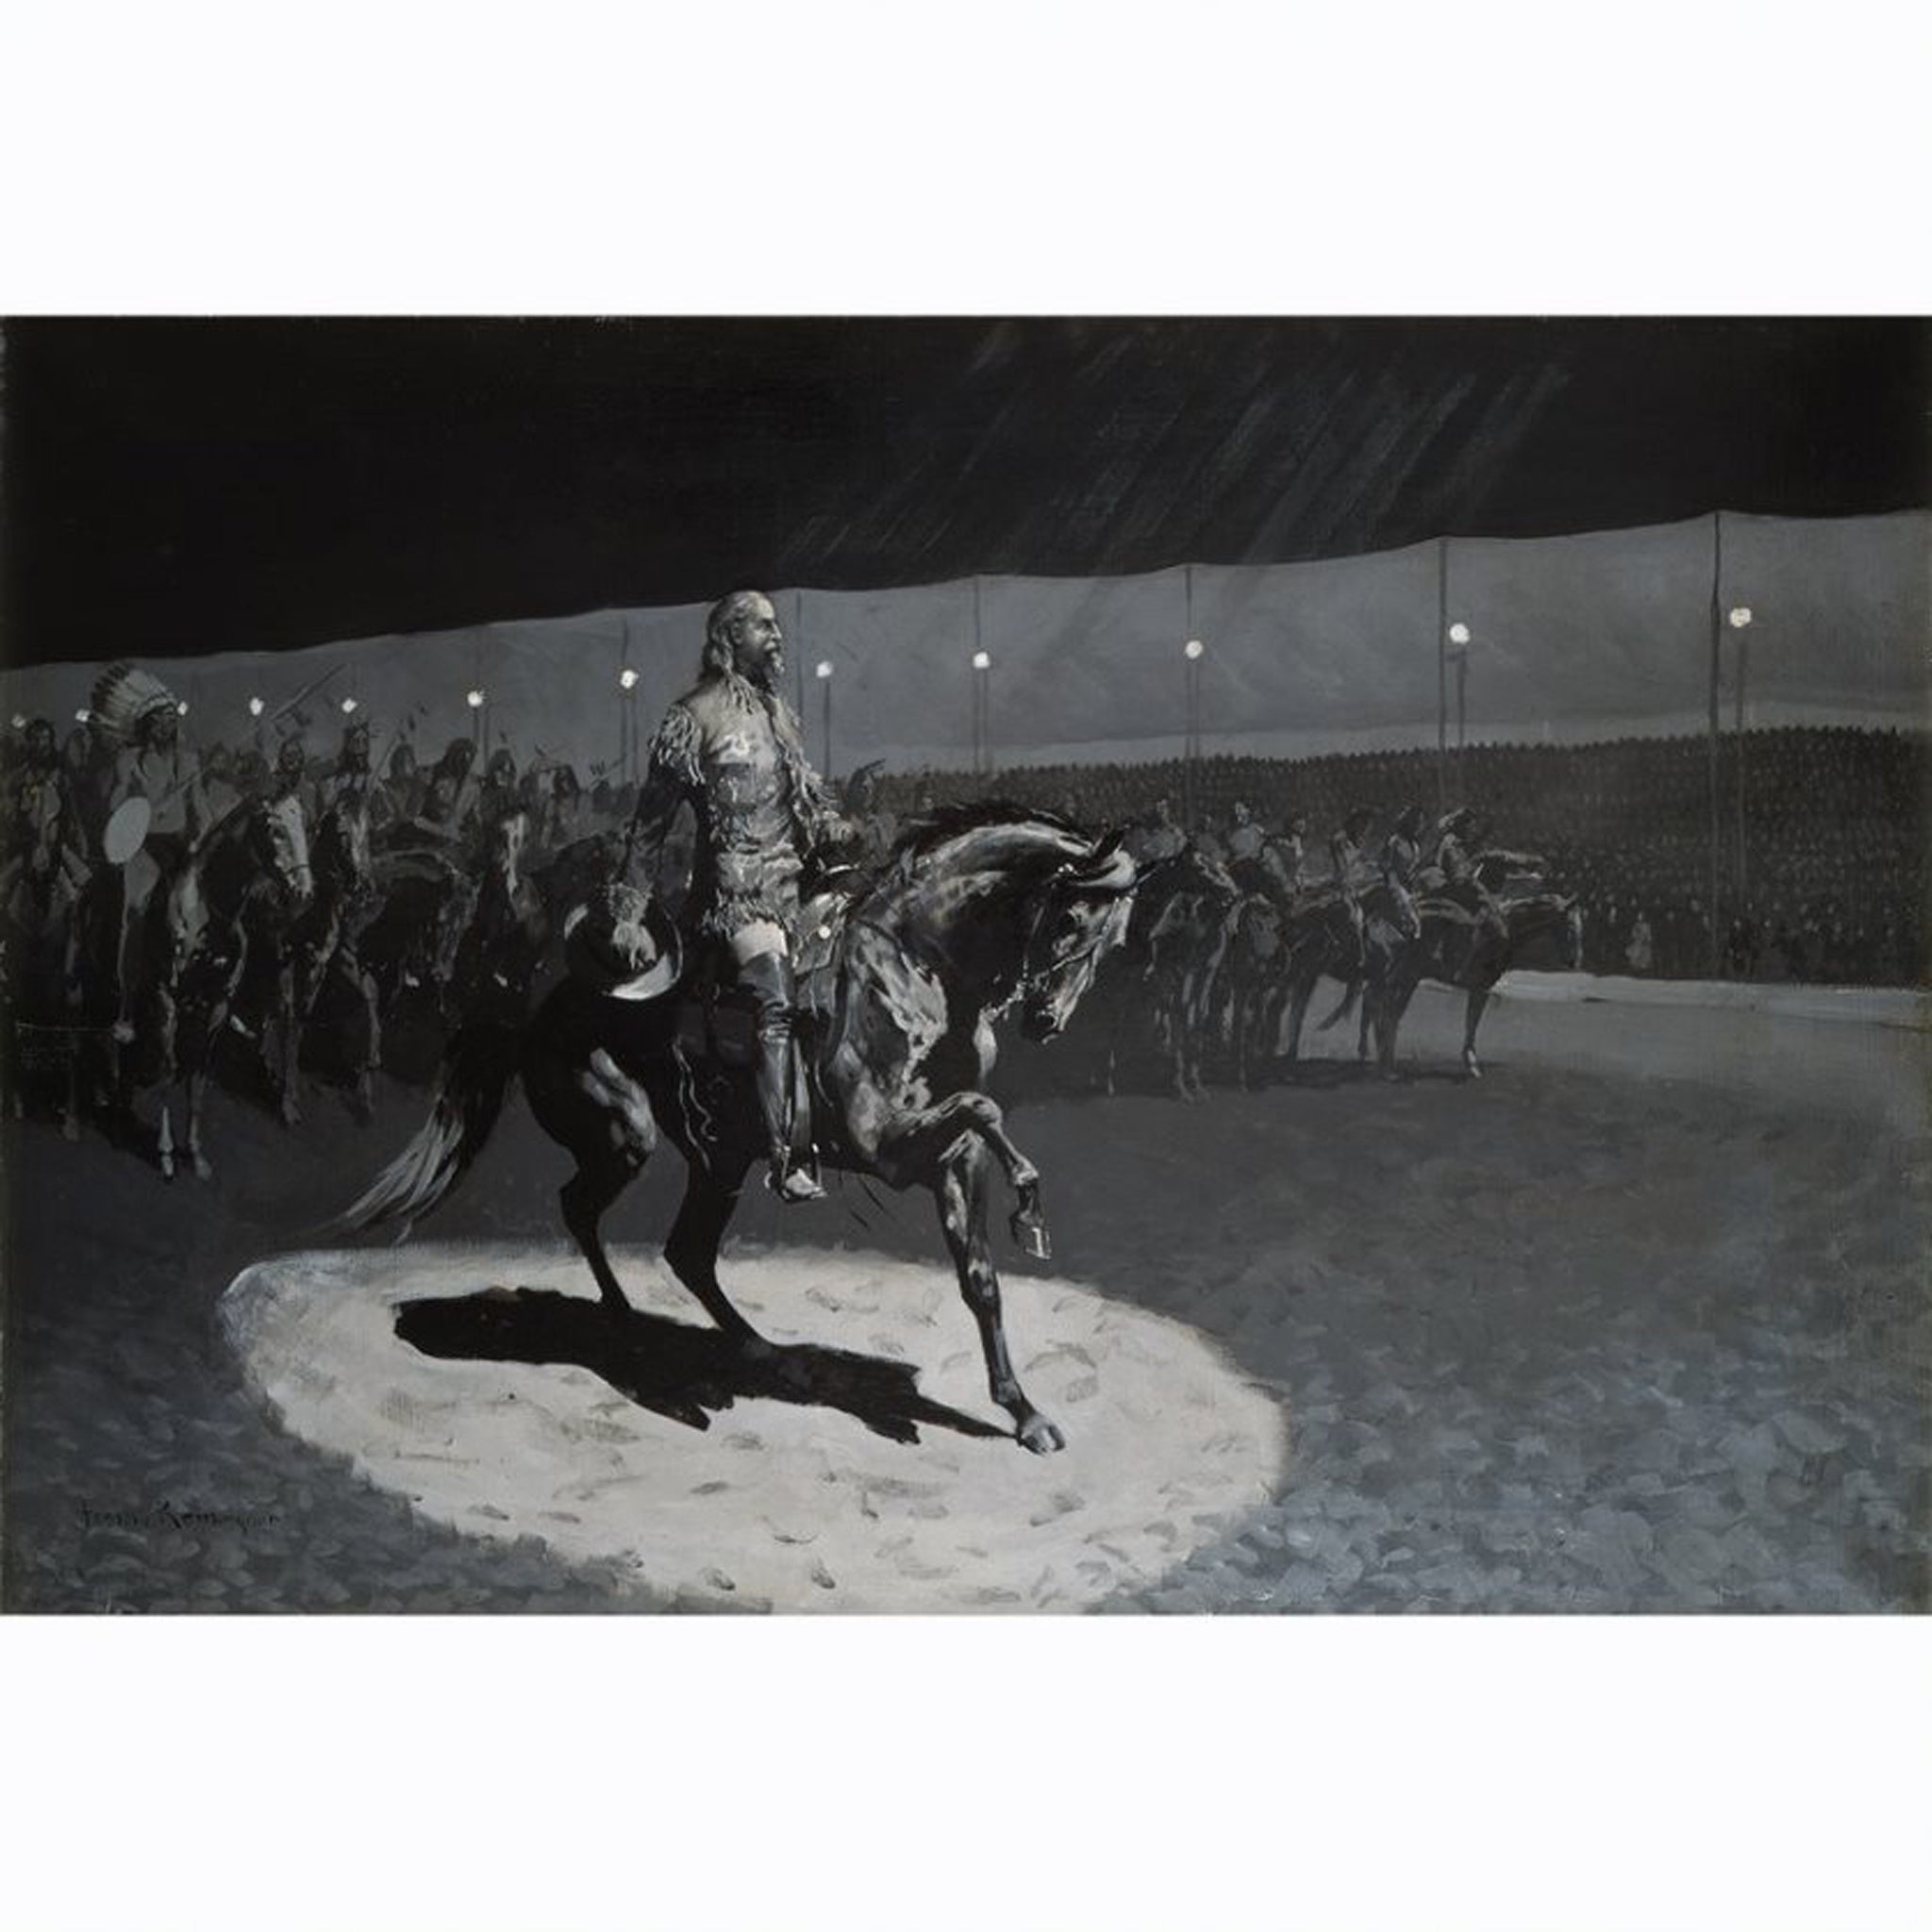 PR 80* BUFFALO BILL IN THE LIMELIGHT BY FREDERIC REMINGTON #31030998